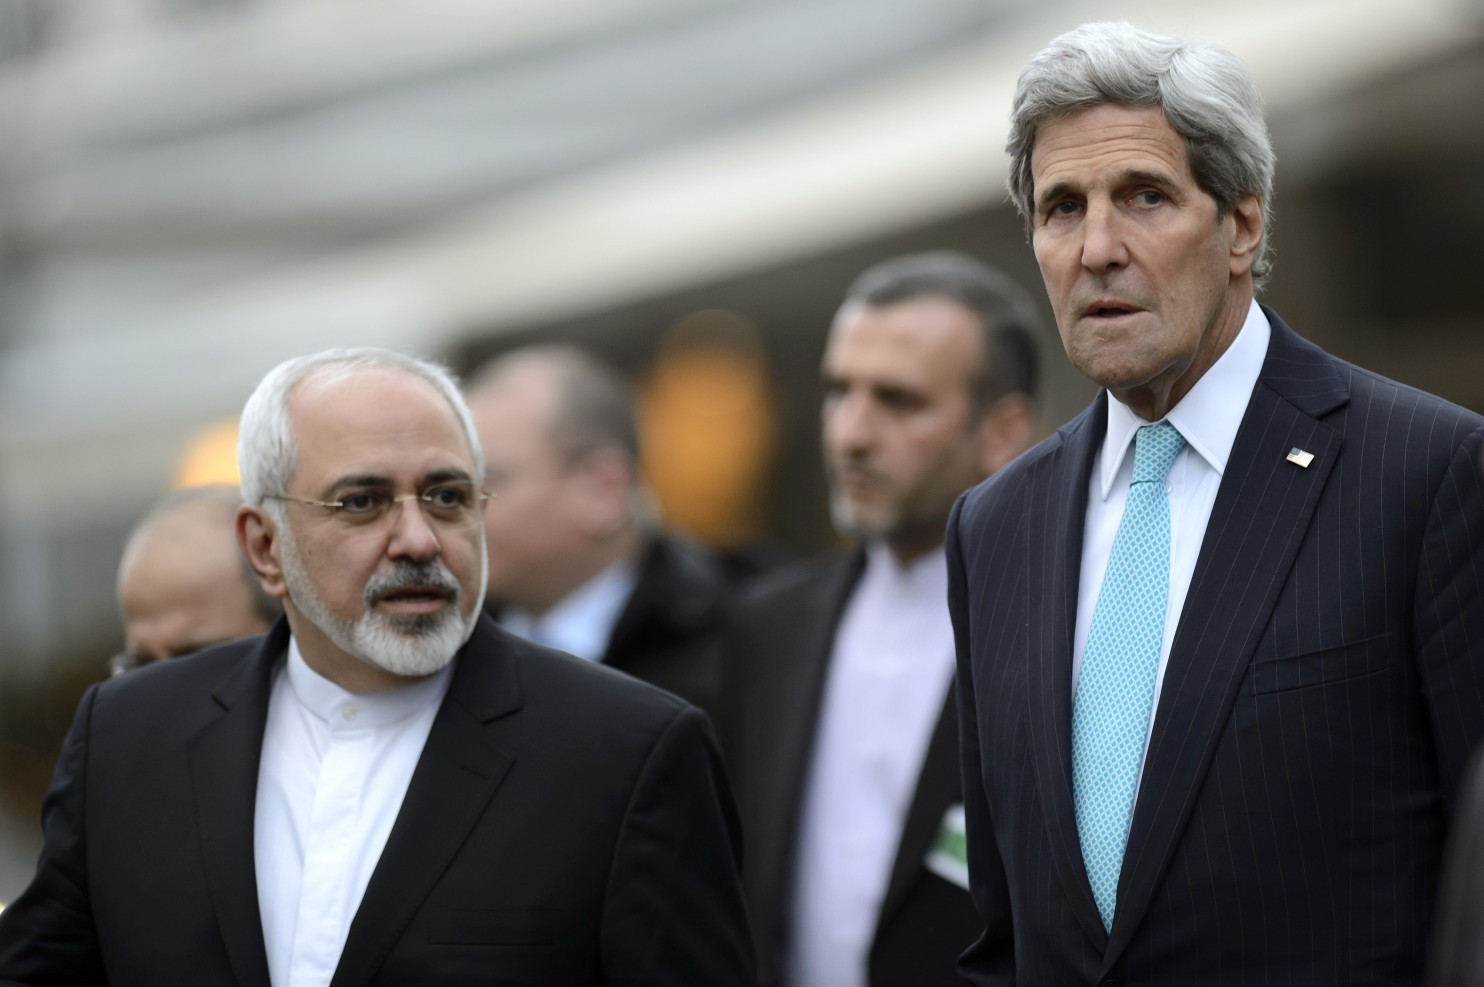 Zarif and Kerry introduced as winners of Chatham House Prize